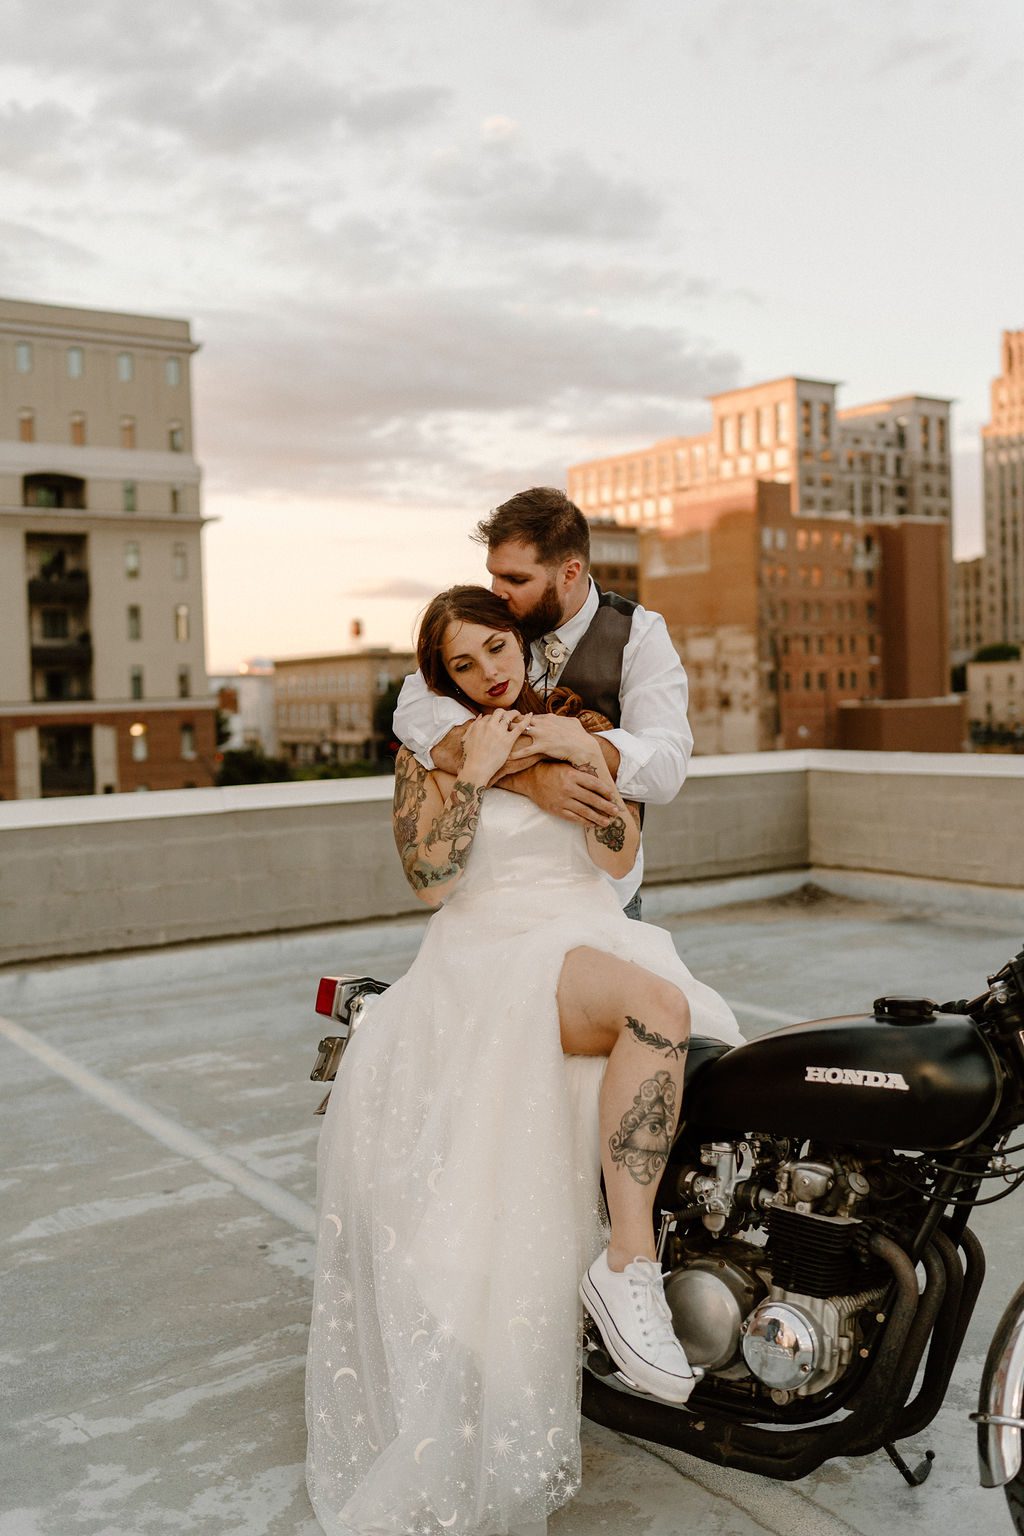 fun urban city elopement With Motorcycle